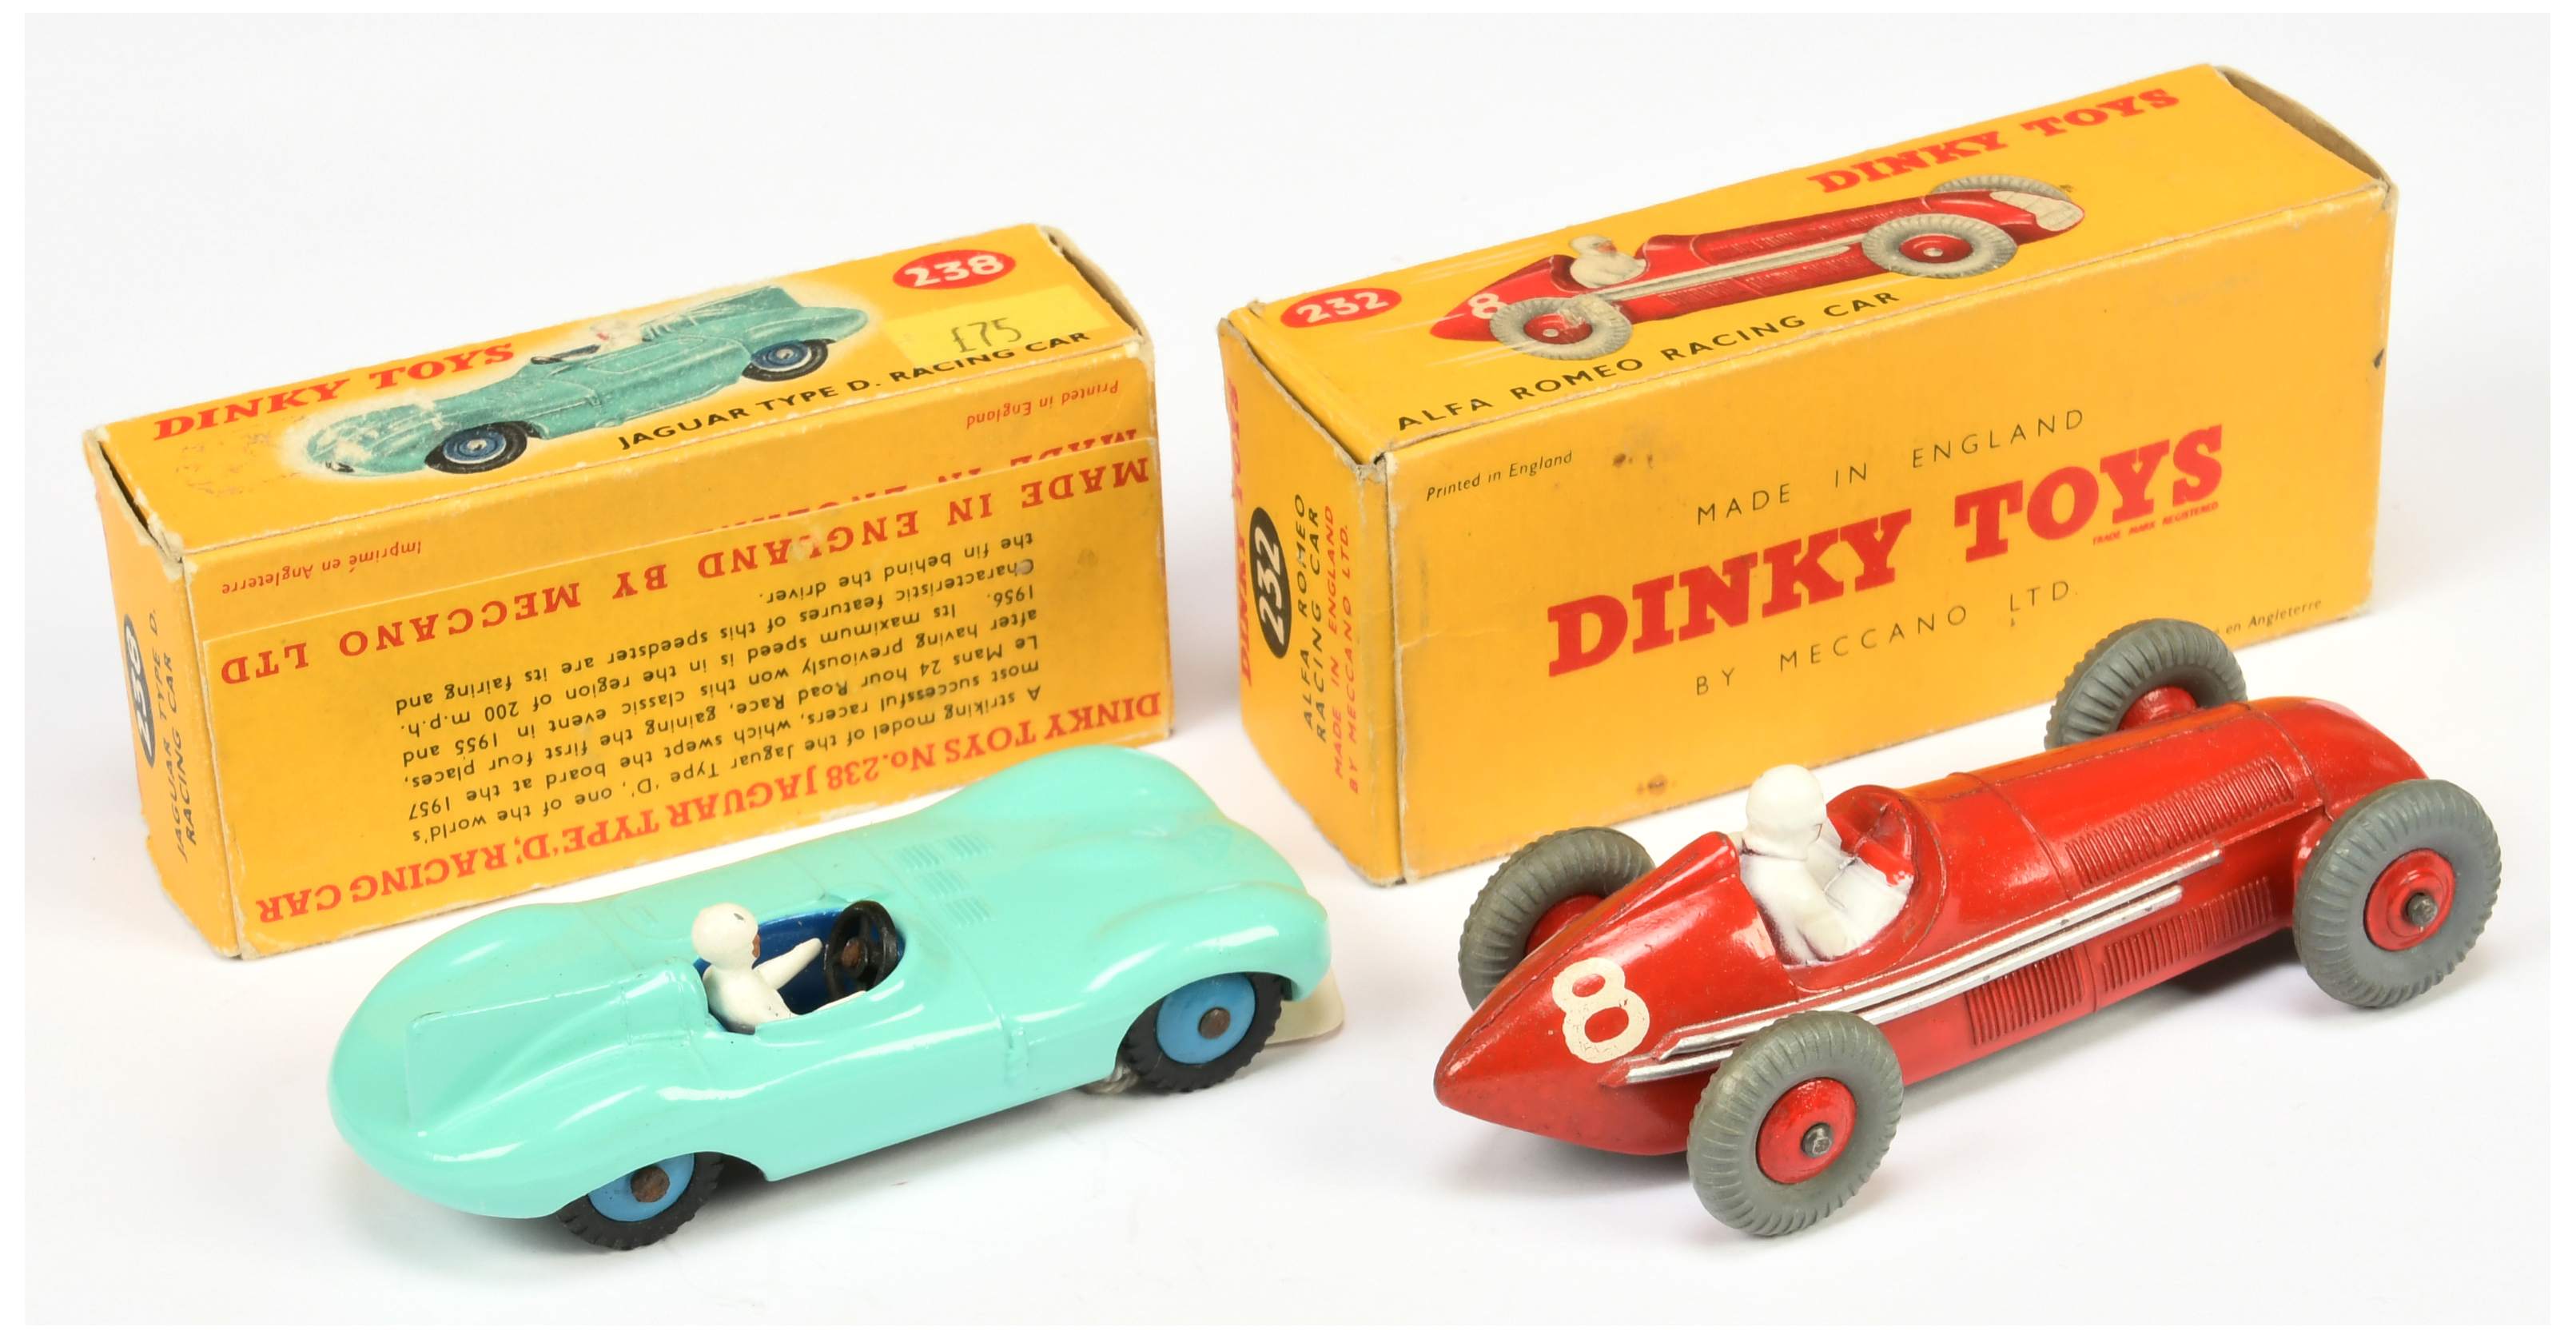 Dinky Toys 232  Alfa Romeo racing Car - red body and rigid hubs, silver grille and 238 Jaguar Typ... - Image 2 of 2